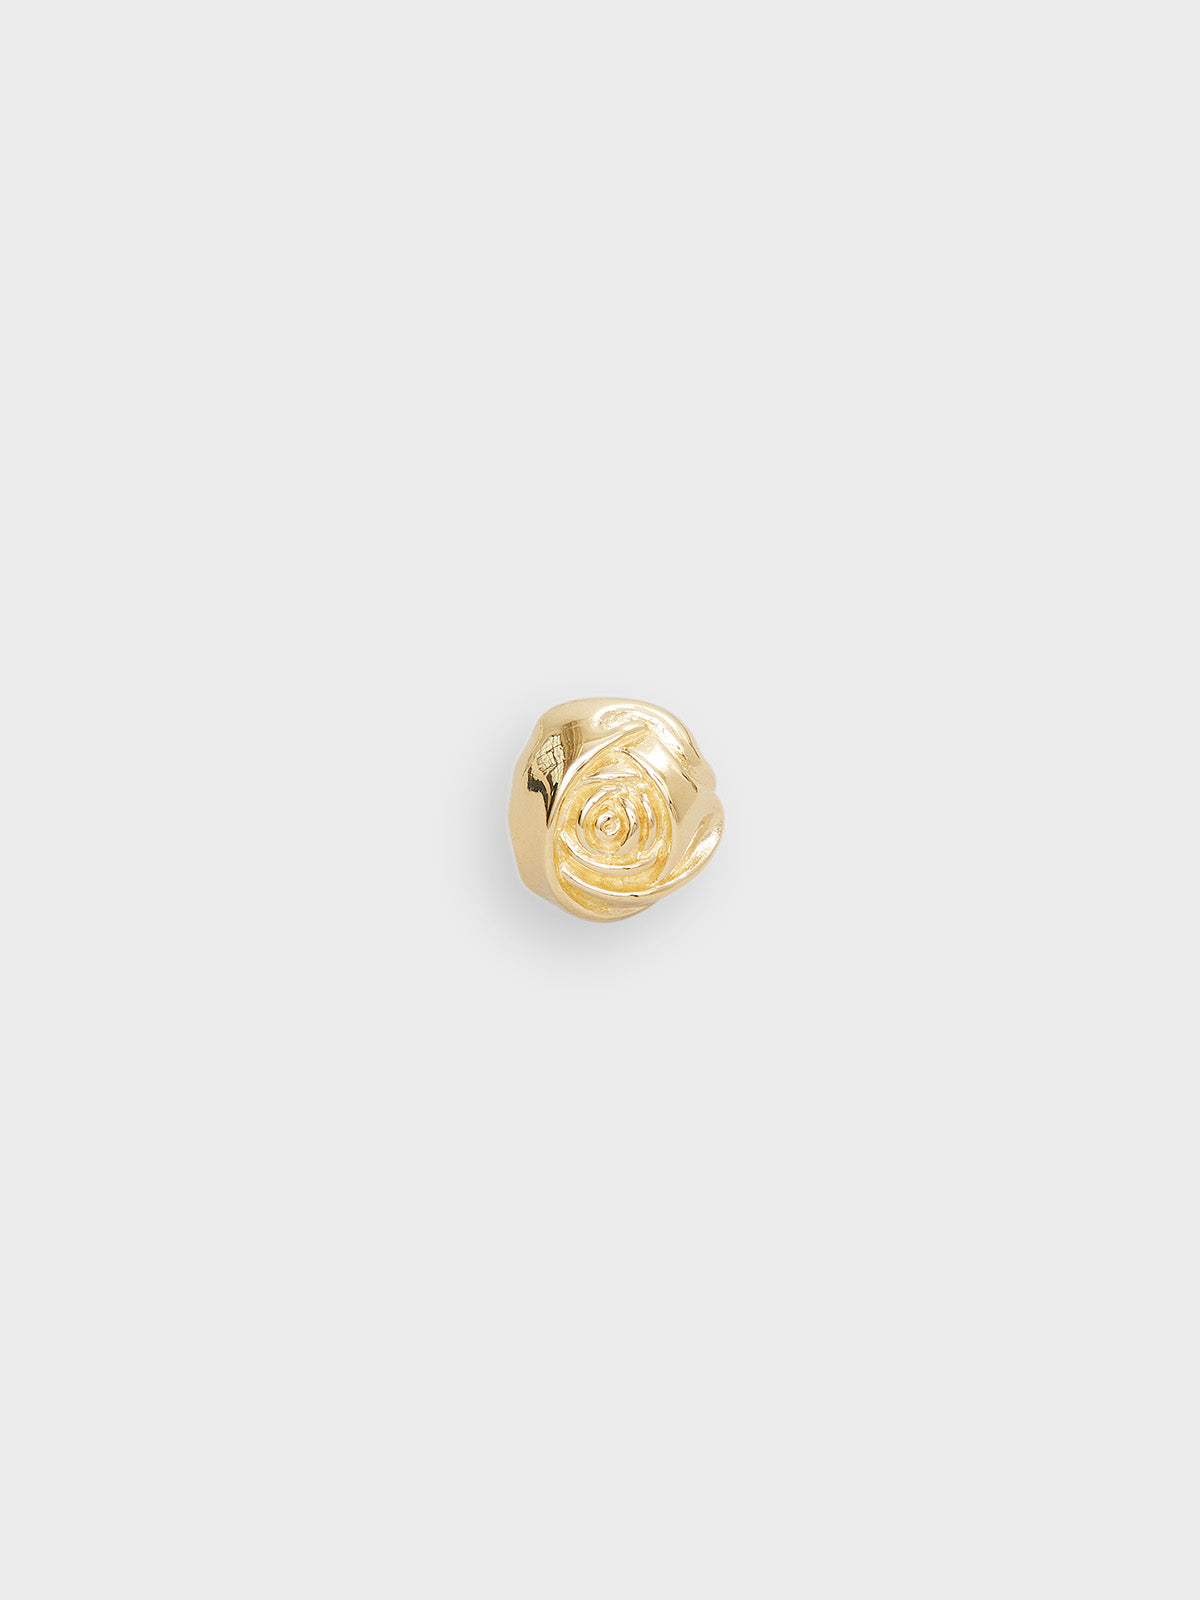 Trine Tuxen - Rose Stud Earring with Gold Plating